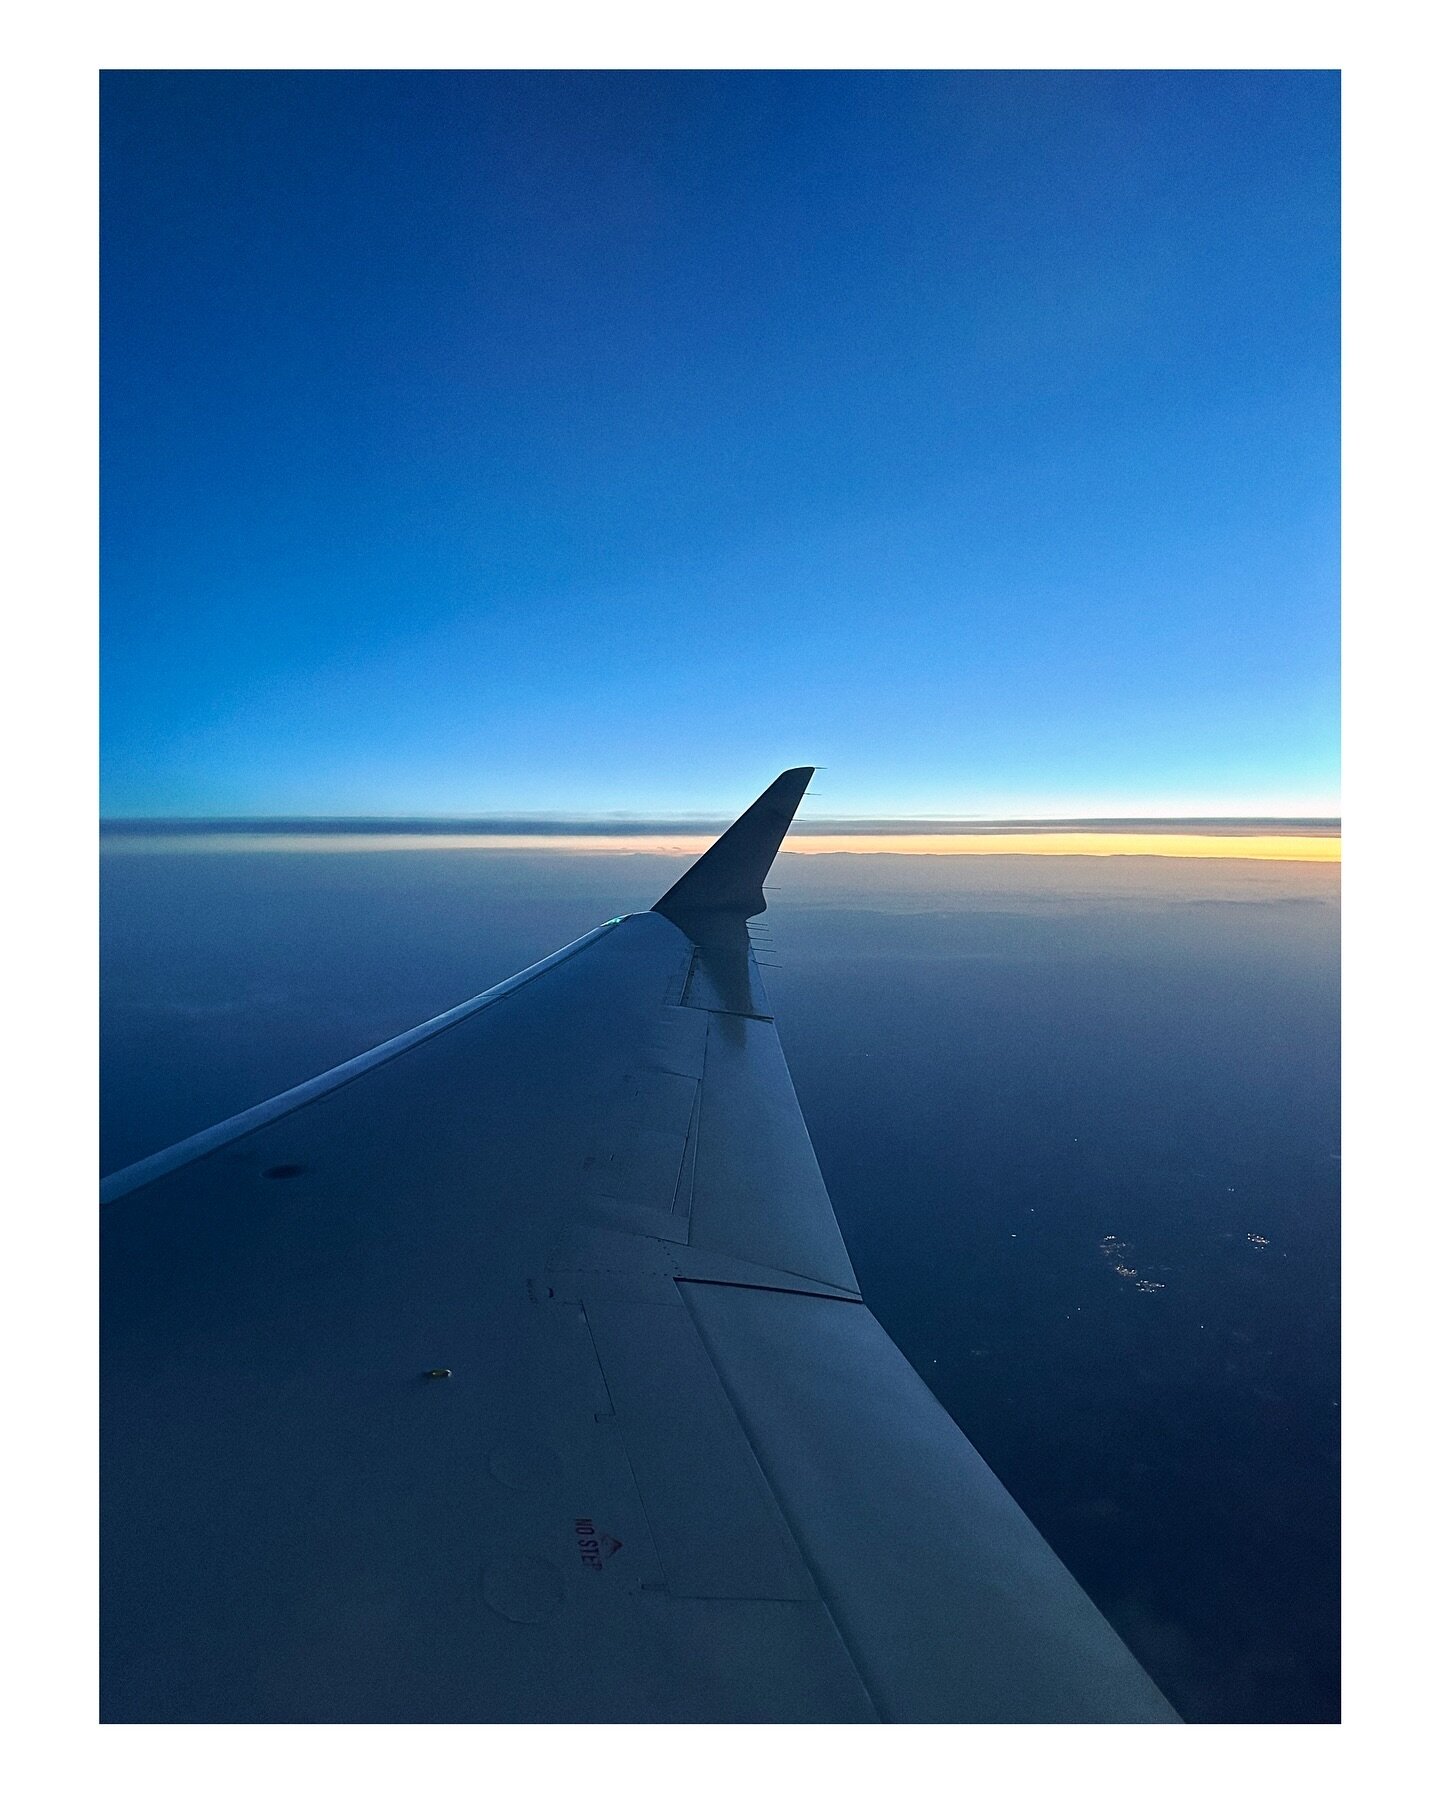 Starting to have a collection of wing shots. Funny I use to be terrified of flying and now I love it ☺️🛫🌎

#iPhone #flying #wing #airplane